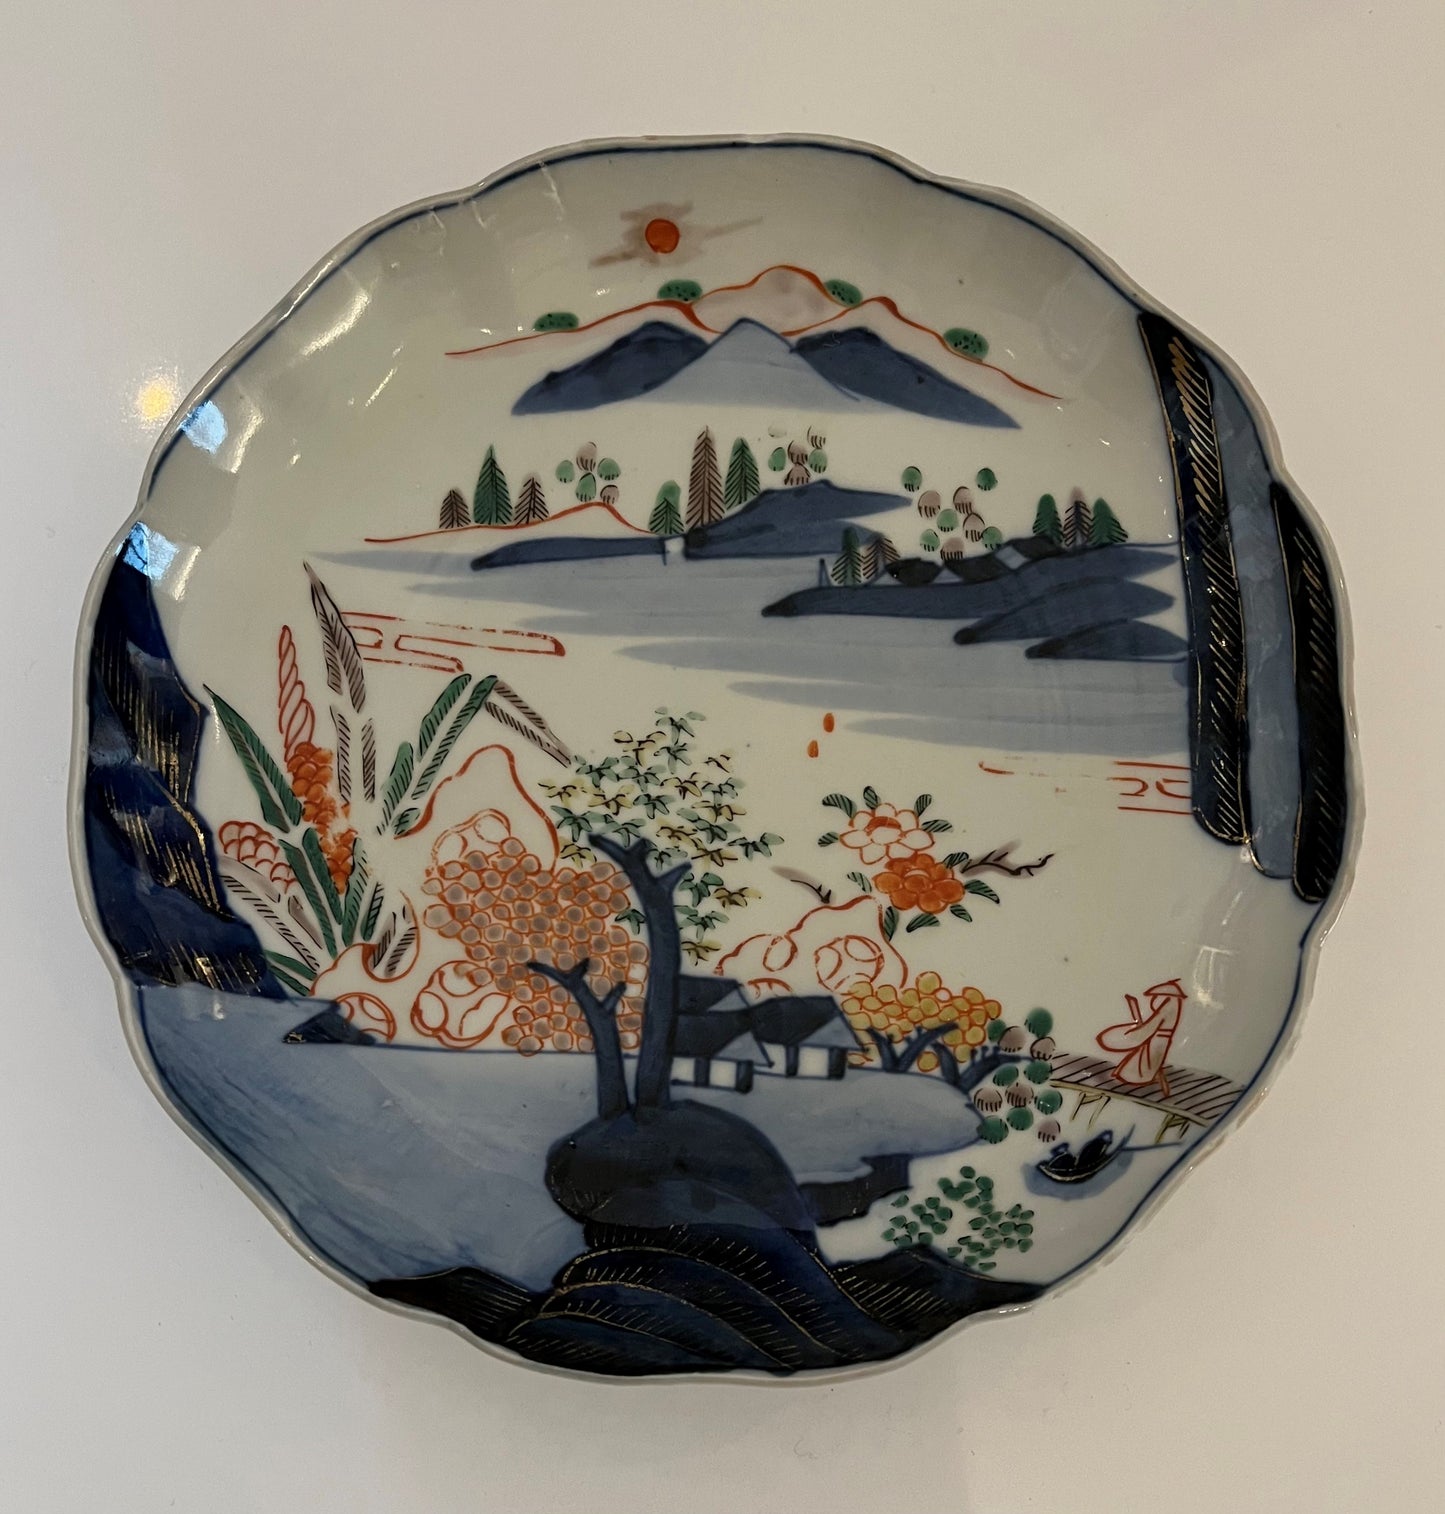 Vintage Japanese Porcelain Plate Not specified